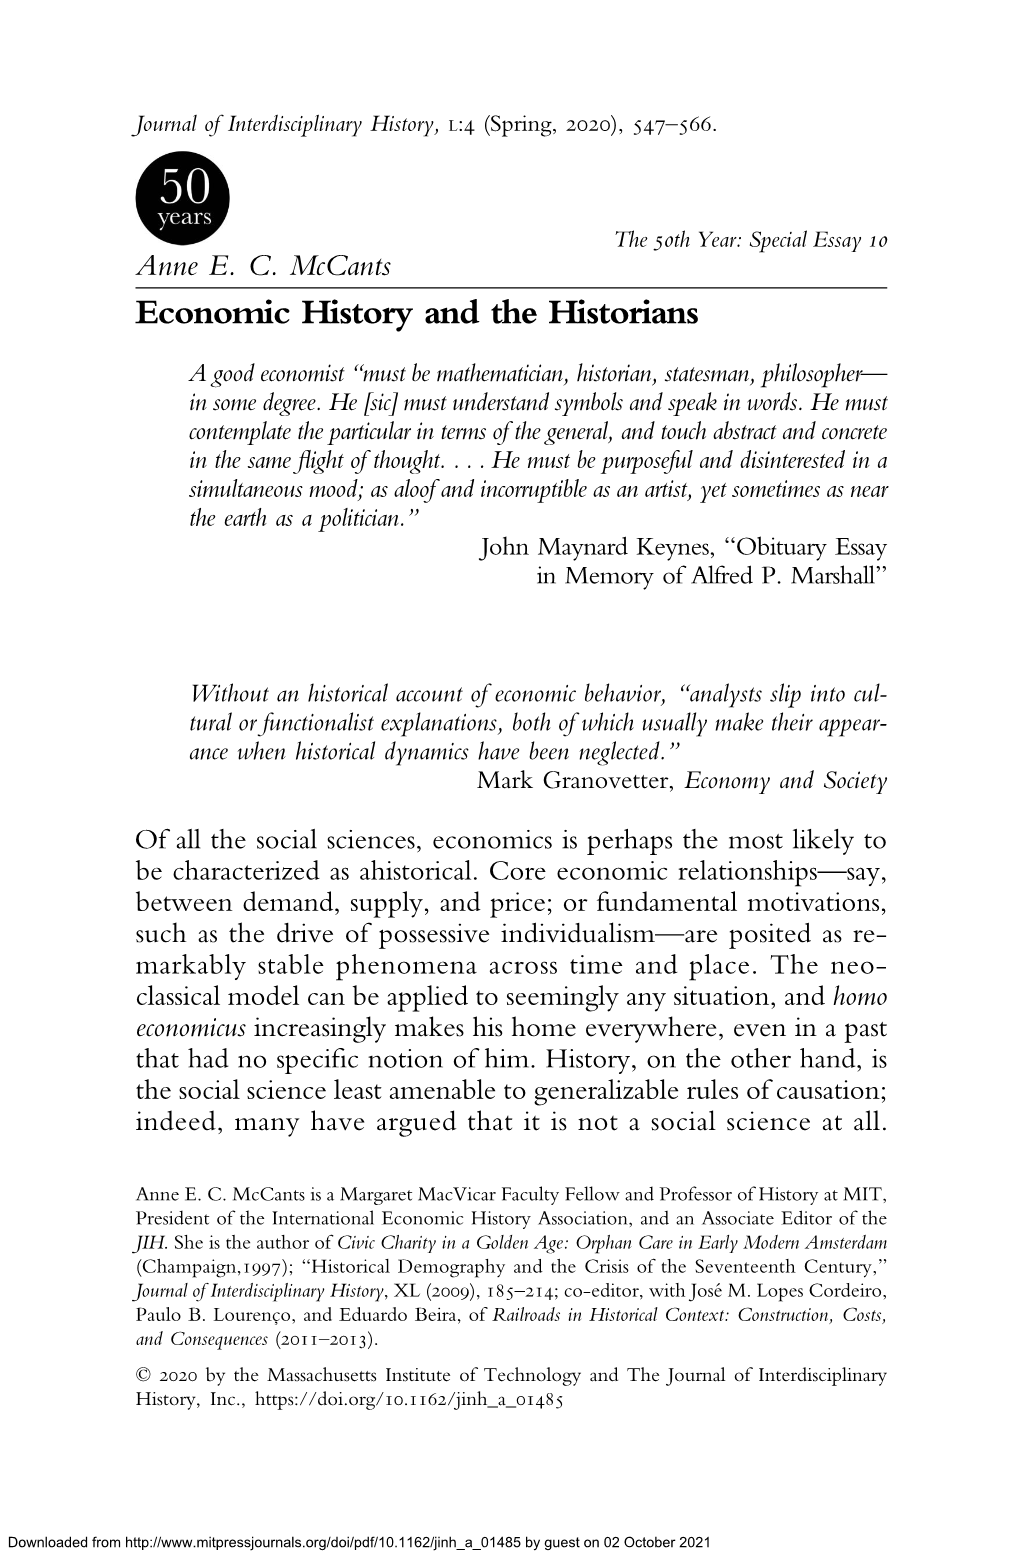 Economic History and the Historians